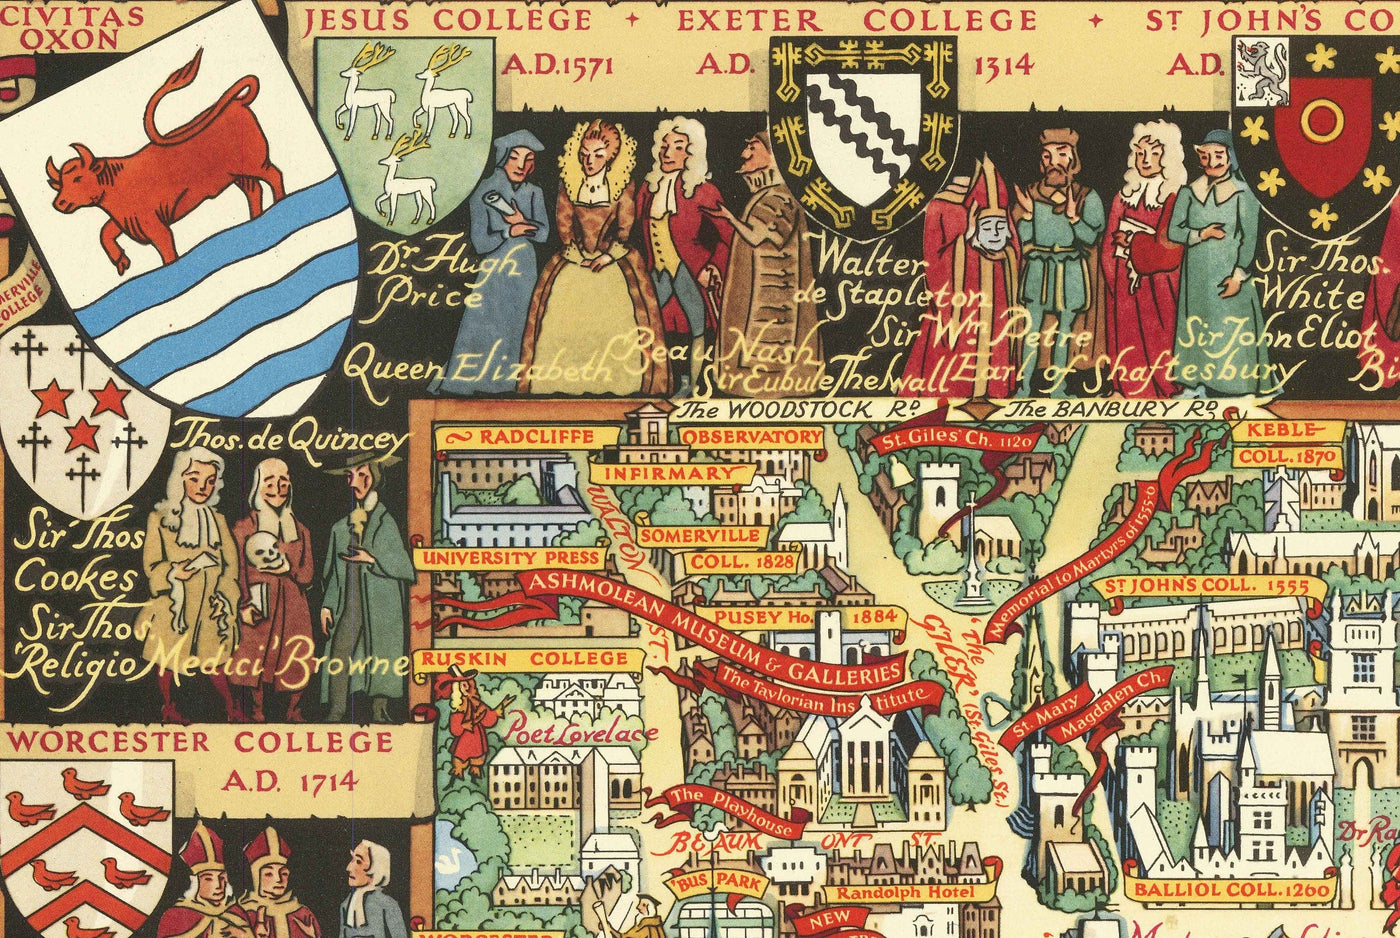 Old Pictorial Map of Oxford by Kerry Lee, 1948 - Pictorial University Colleges, Landmarks - St Catherine's, Keble, All Souls